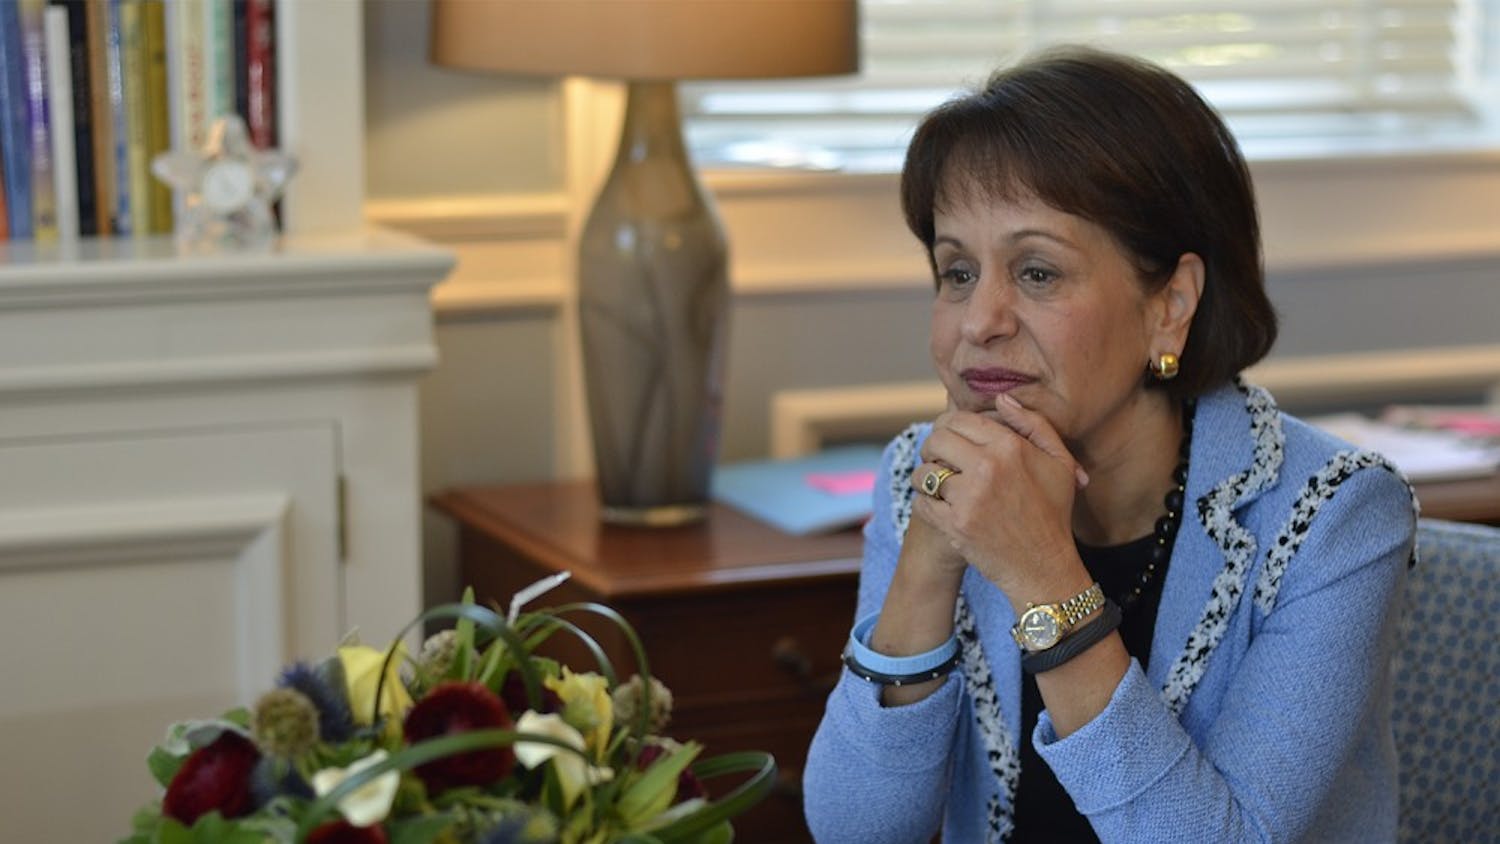 Chancellor Carol Folt promised to give disciplinary action to nine employees upon receiving the Wainstein report.